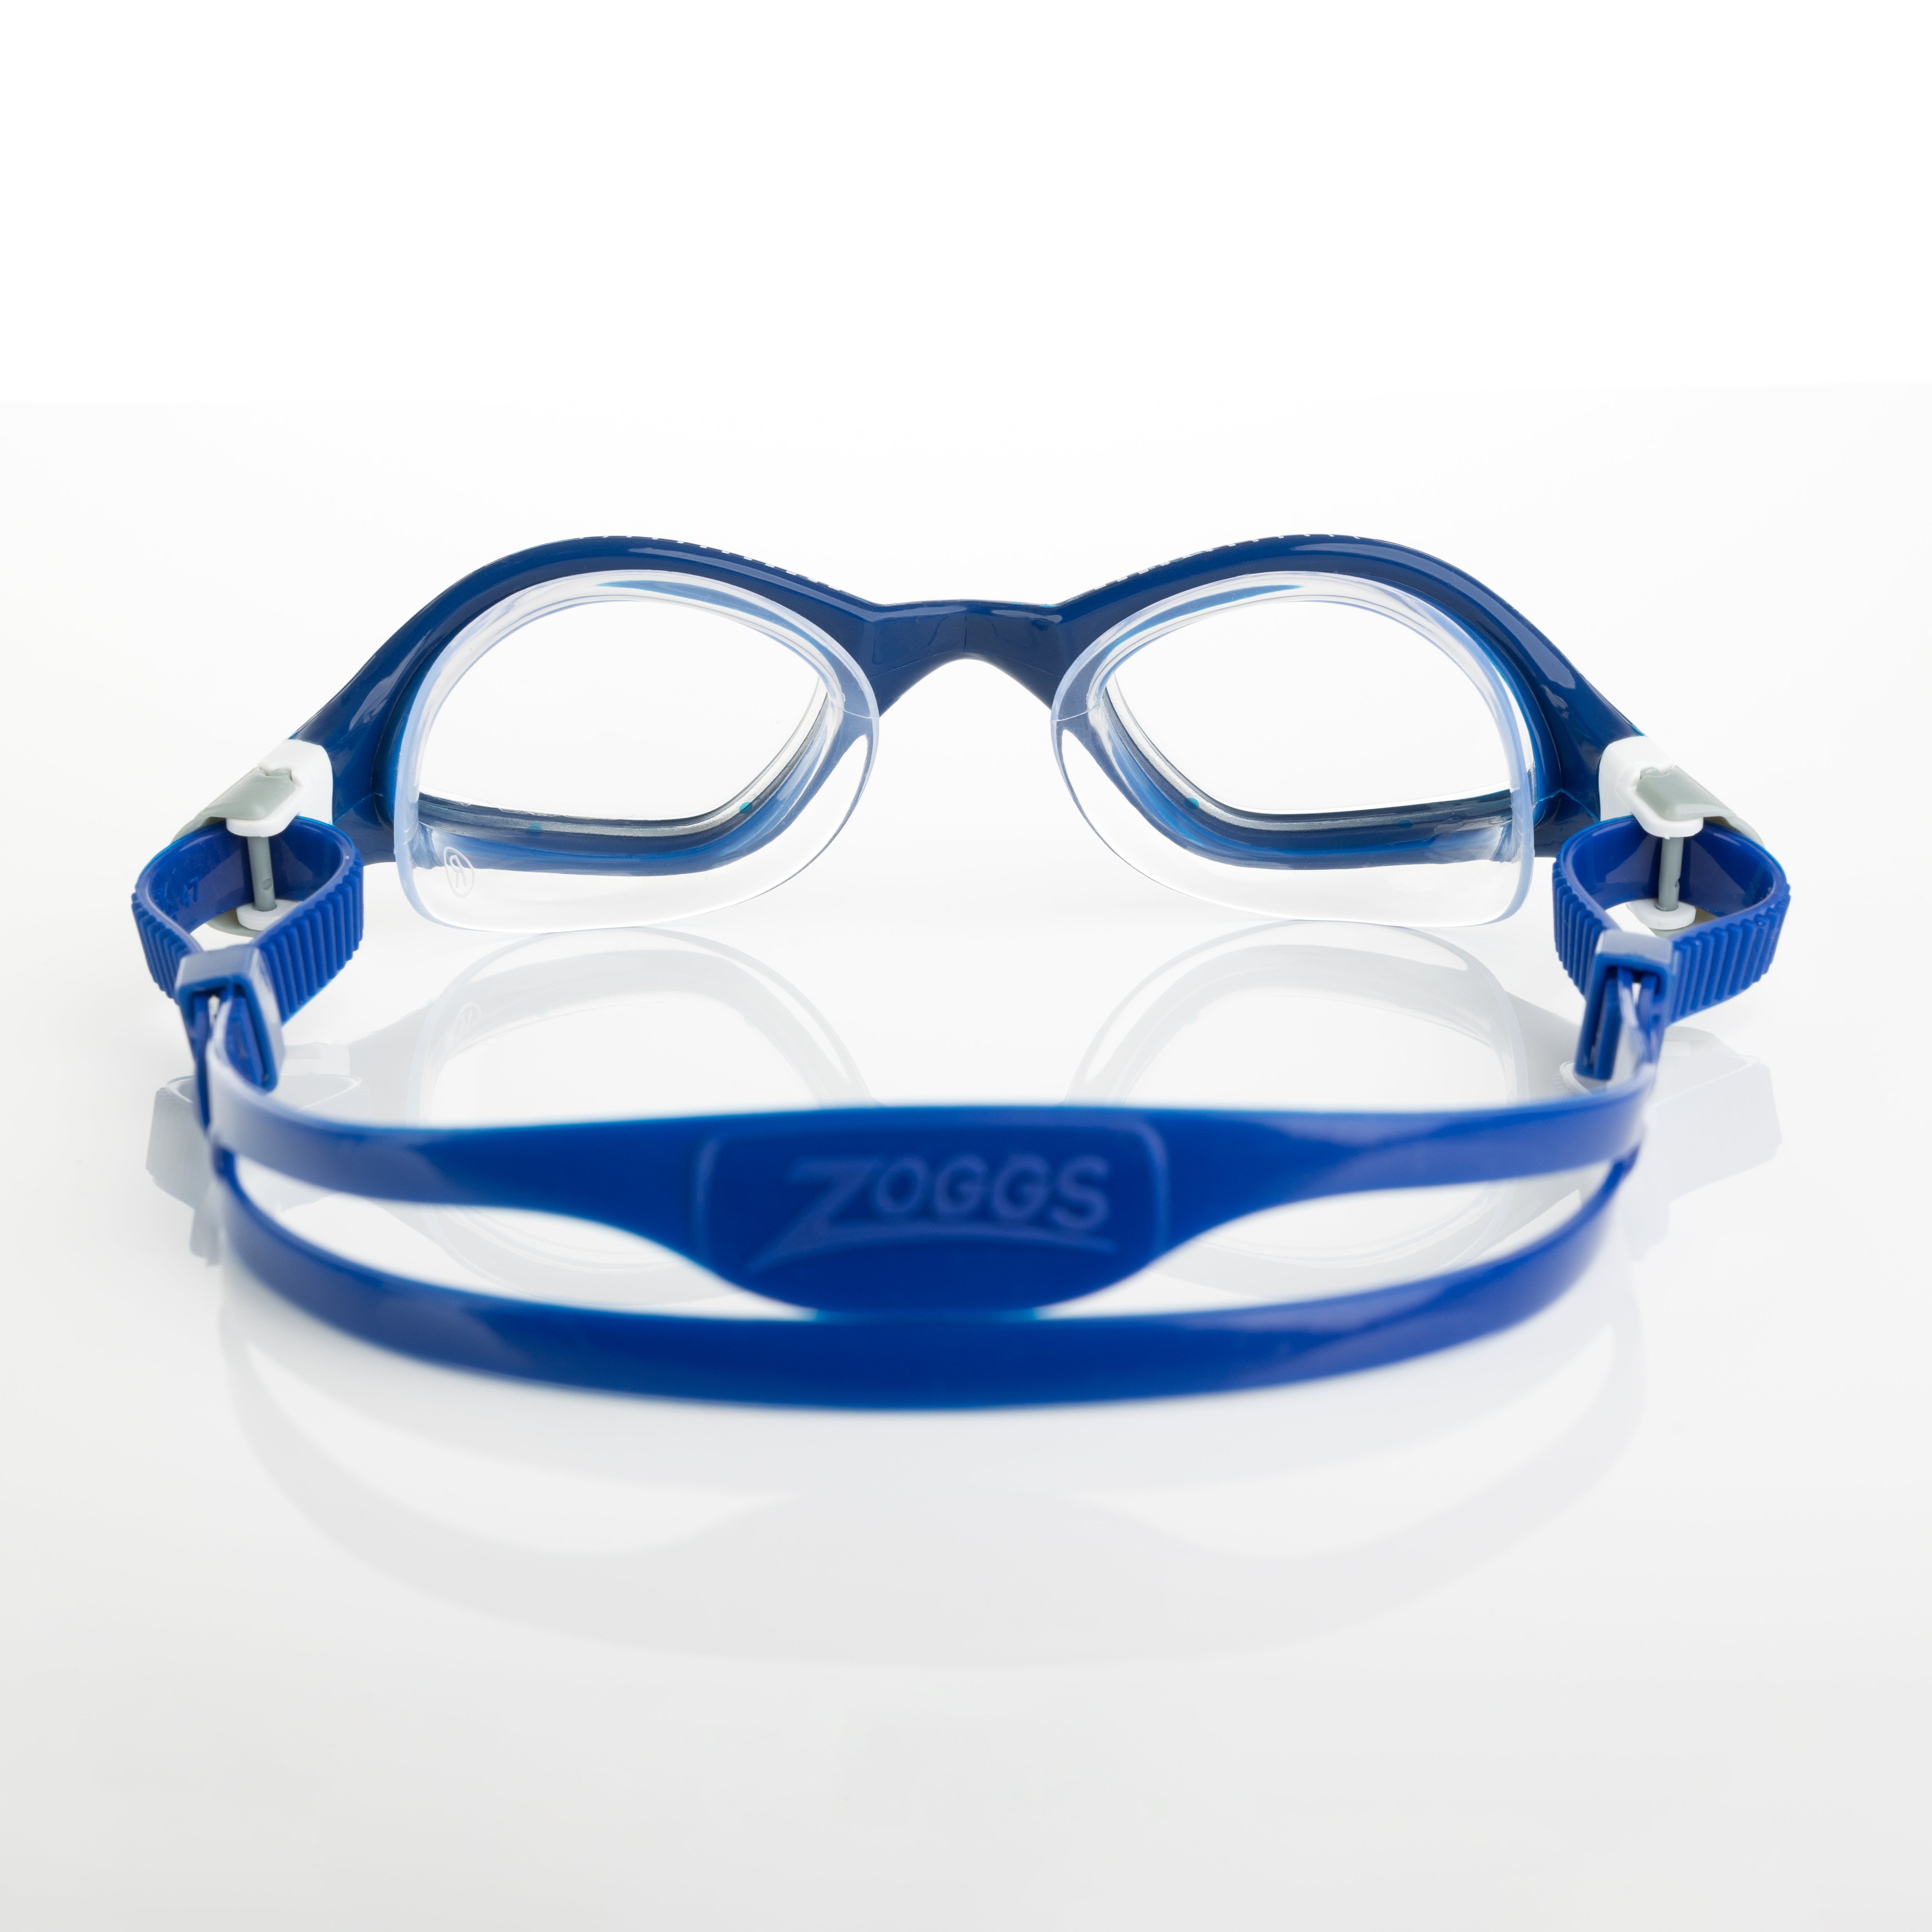 Zoggs Tiger LSR+, blue/white/clear